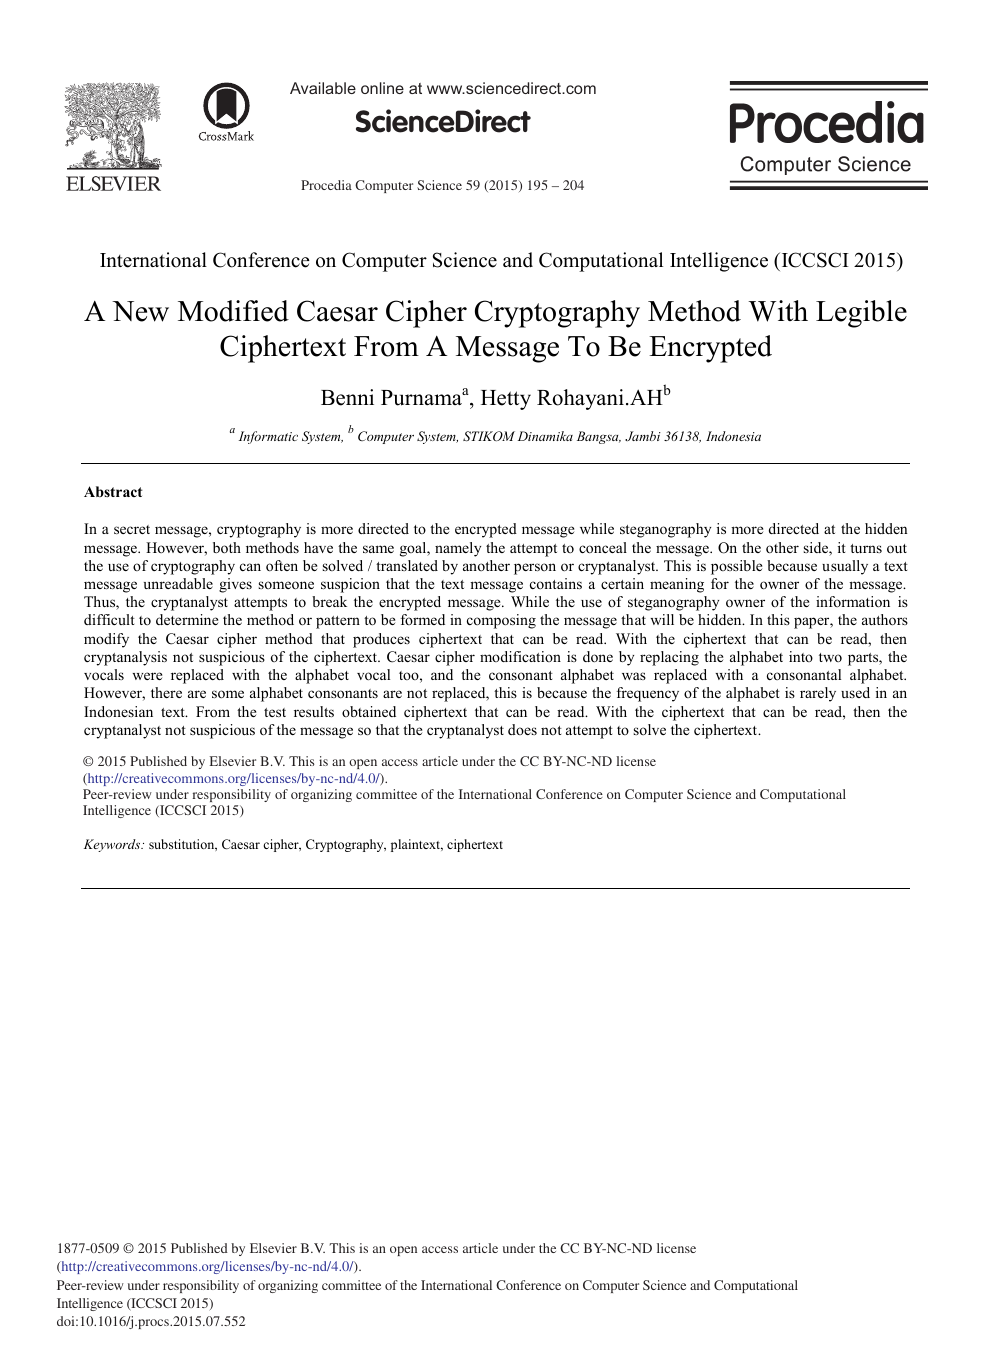 A New Modified Caesar Cipher Cryptography Method With Legibleciphertext From A Message To Be Encrypted Topic Of Research Paper In Computer And Information Sciences Download Scholarly Article Pdf And Read For